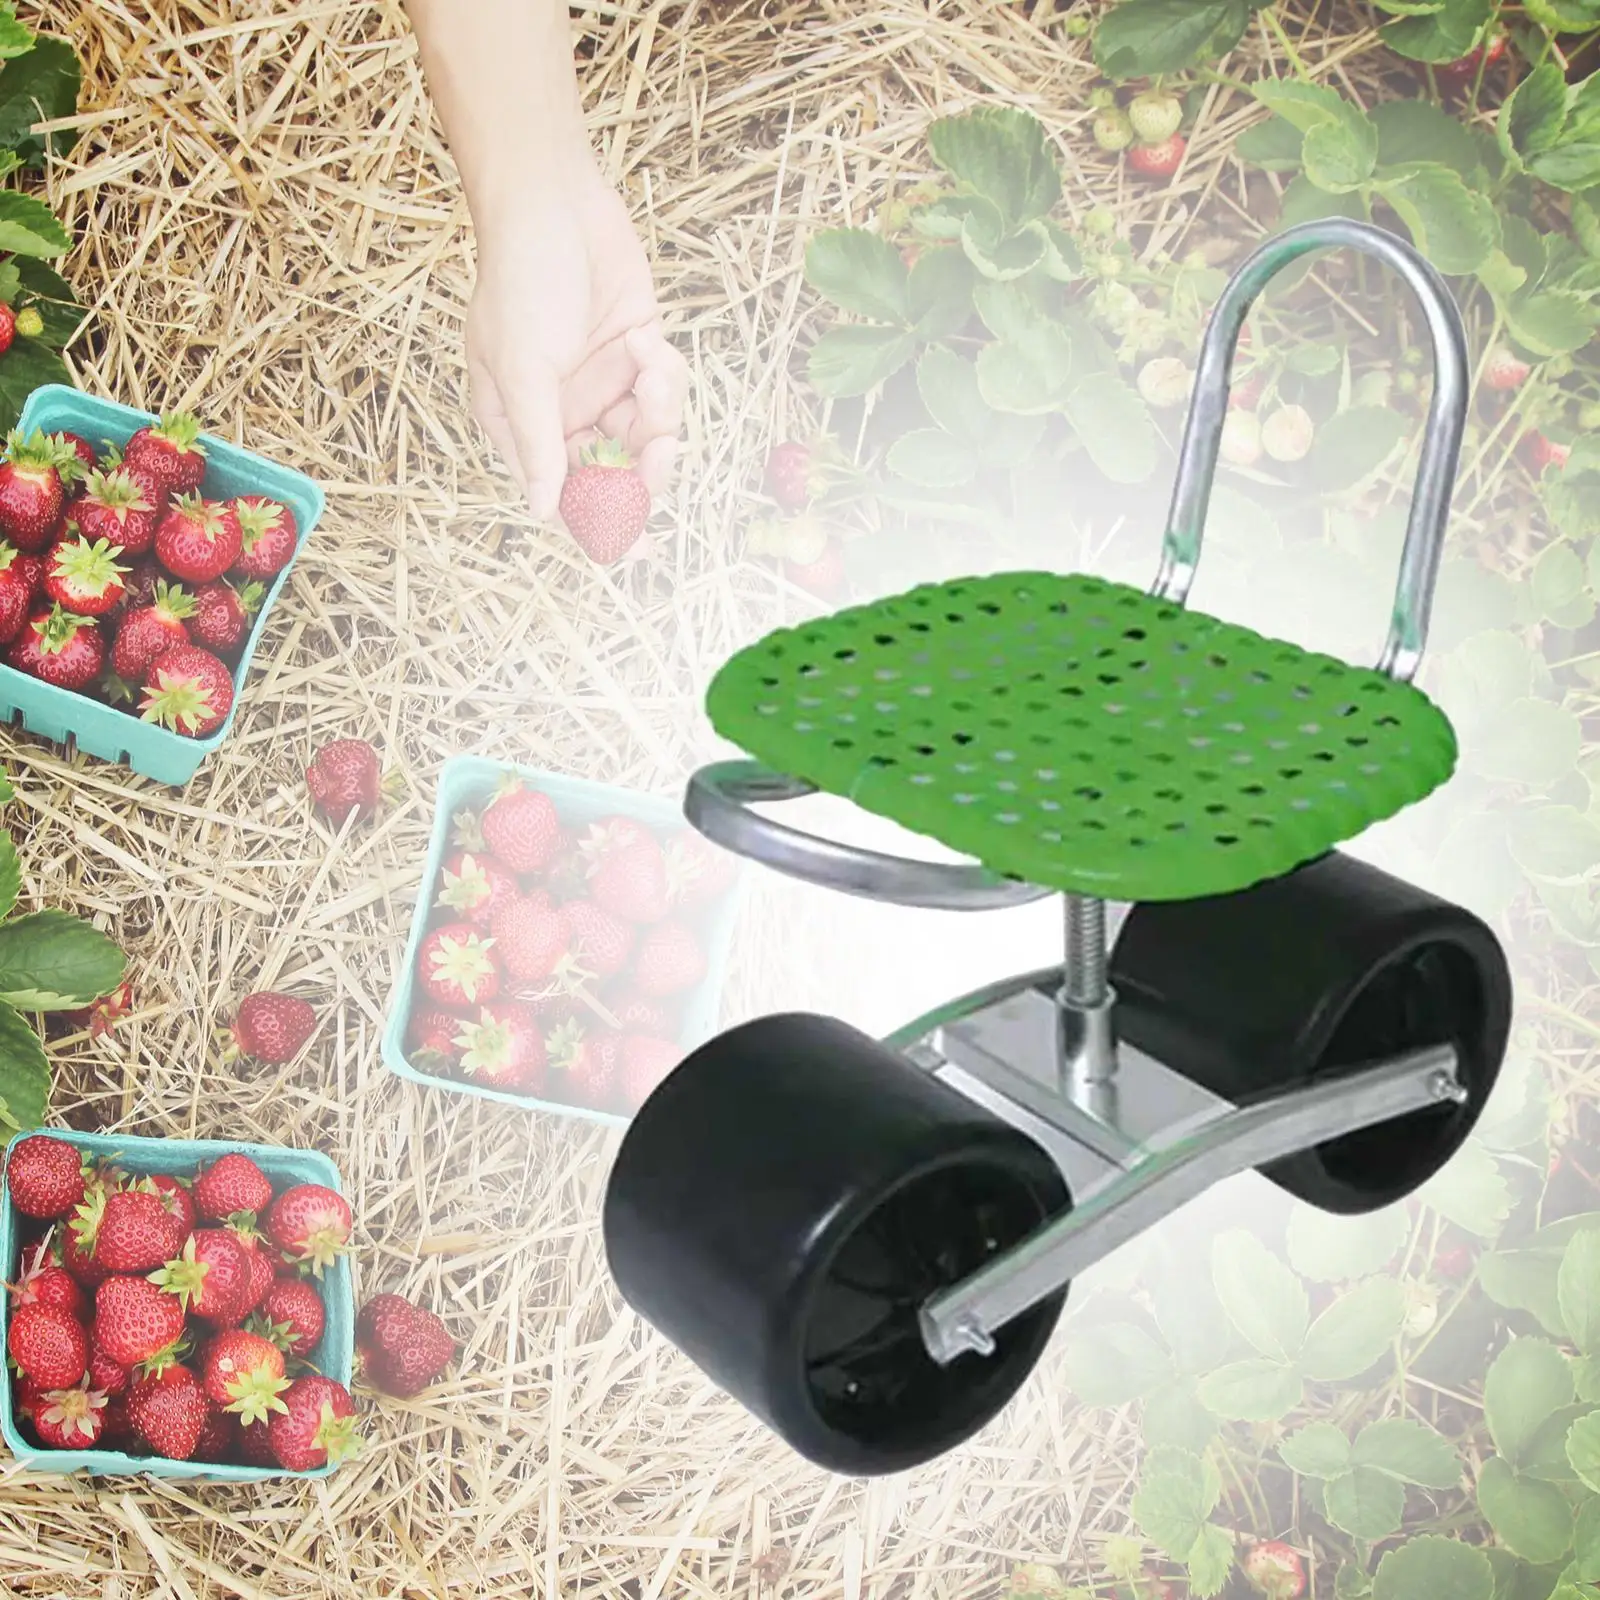 Outdoor Cart Height Adjustable 360 Degree Swivel Seat Rolling Seat Lawn Wagon Cart for Weeding Planting Garden Easy to Move